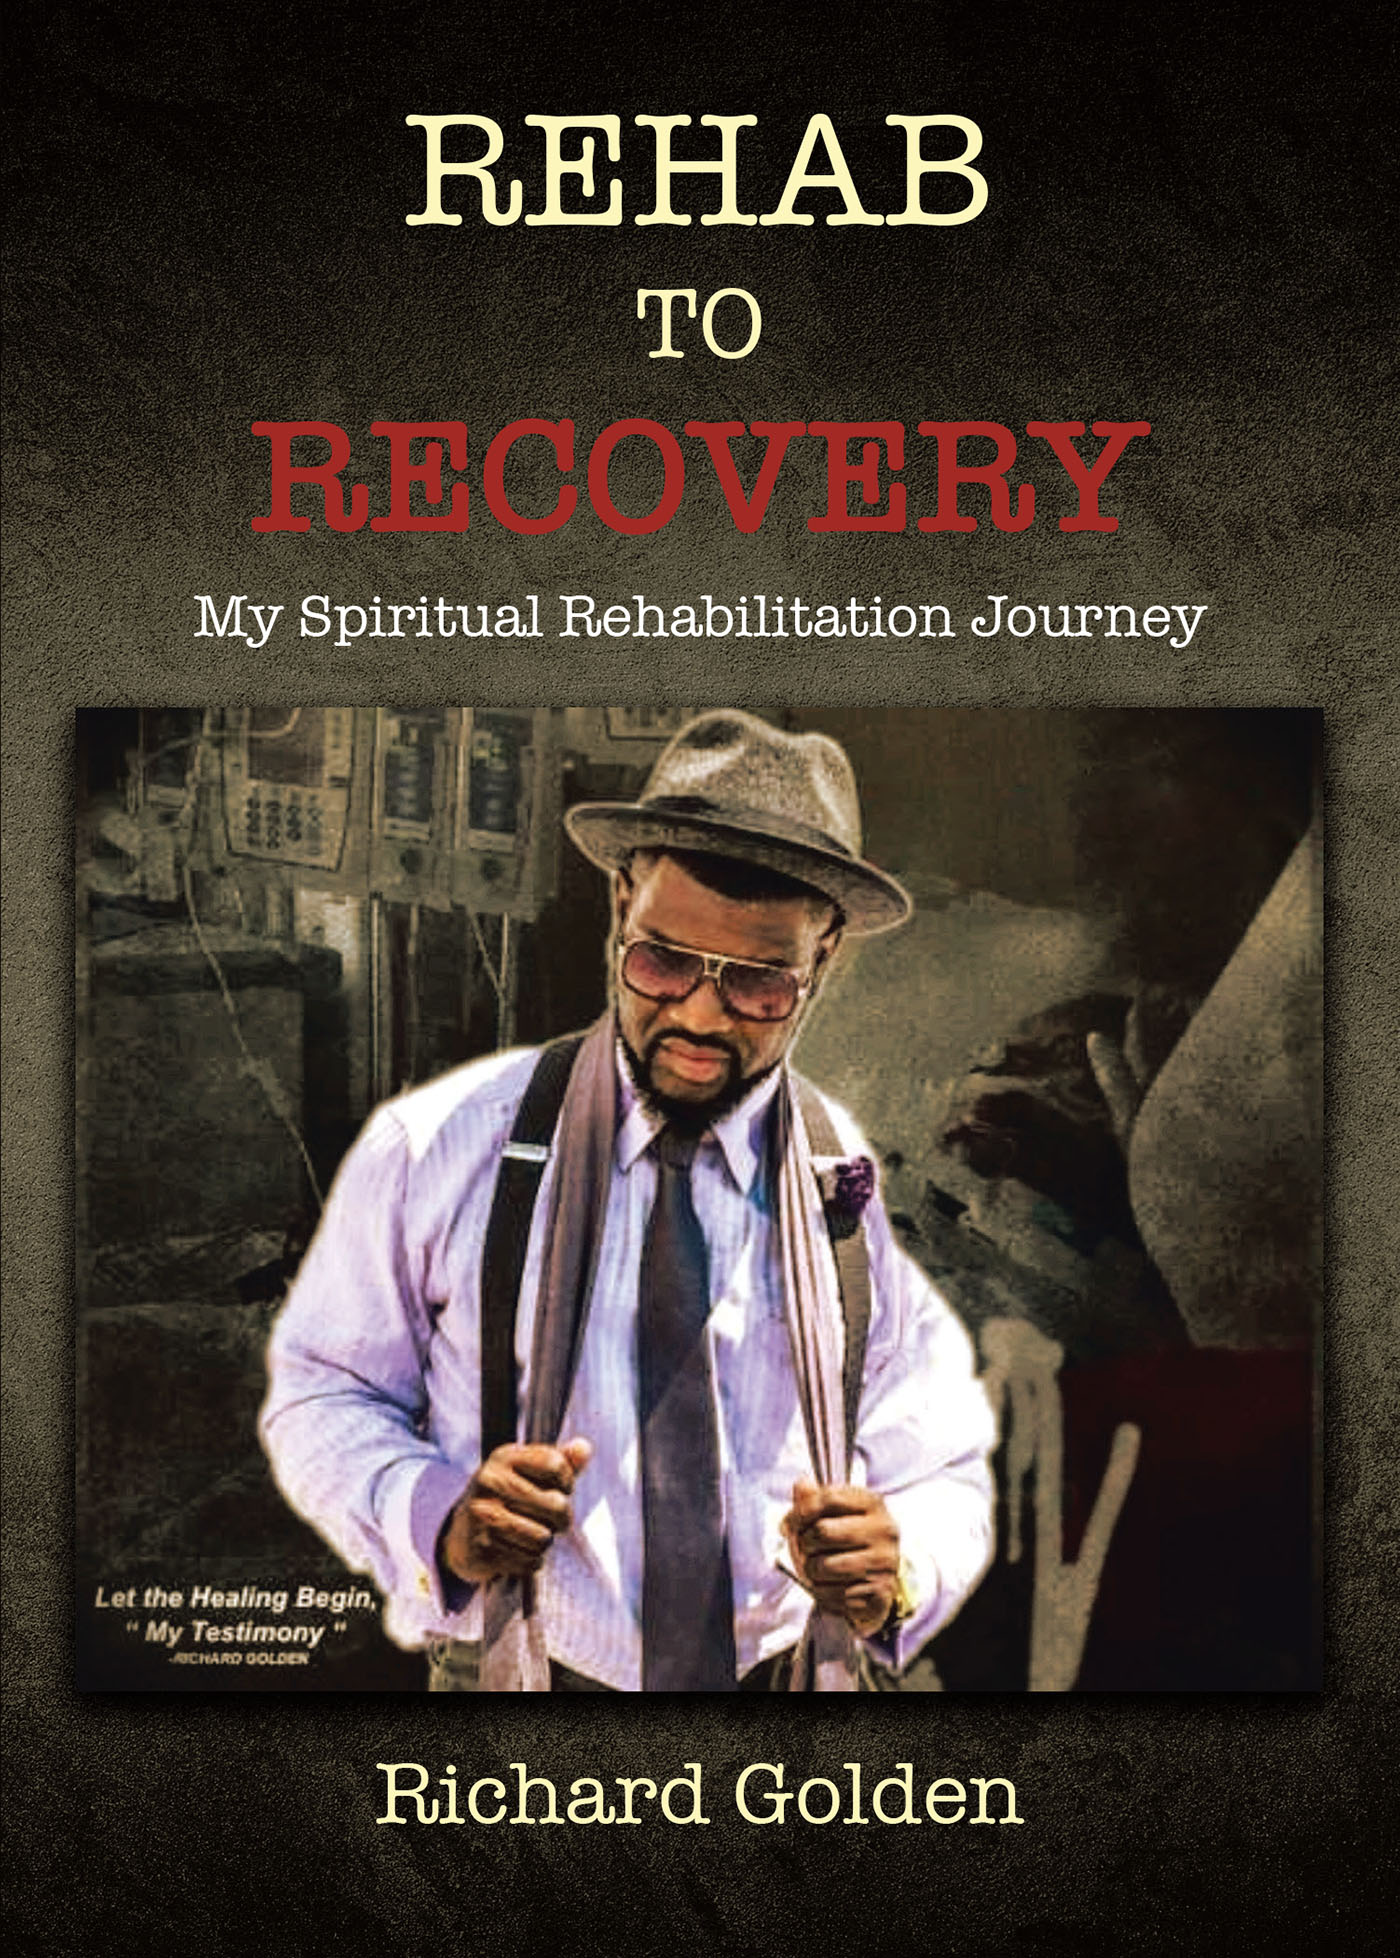 Richard Golden’s Newly Released “Rehab to Recovery: My Spiritual Rehabilitation Journey” is a Powerful Testimony of God’s Ever-Present Grace